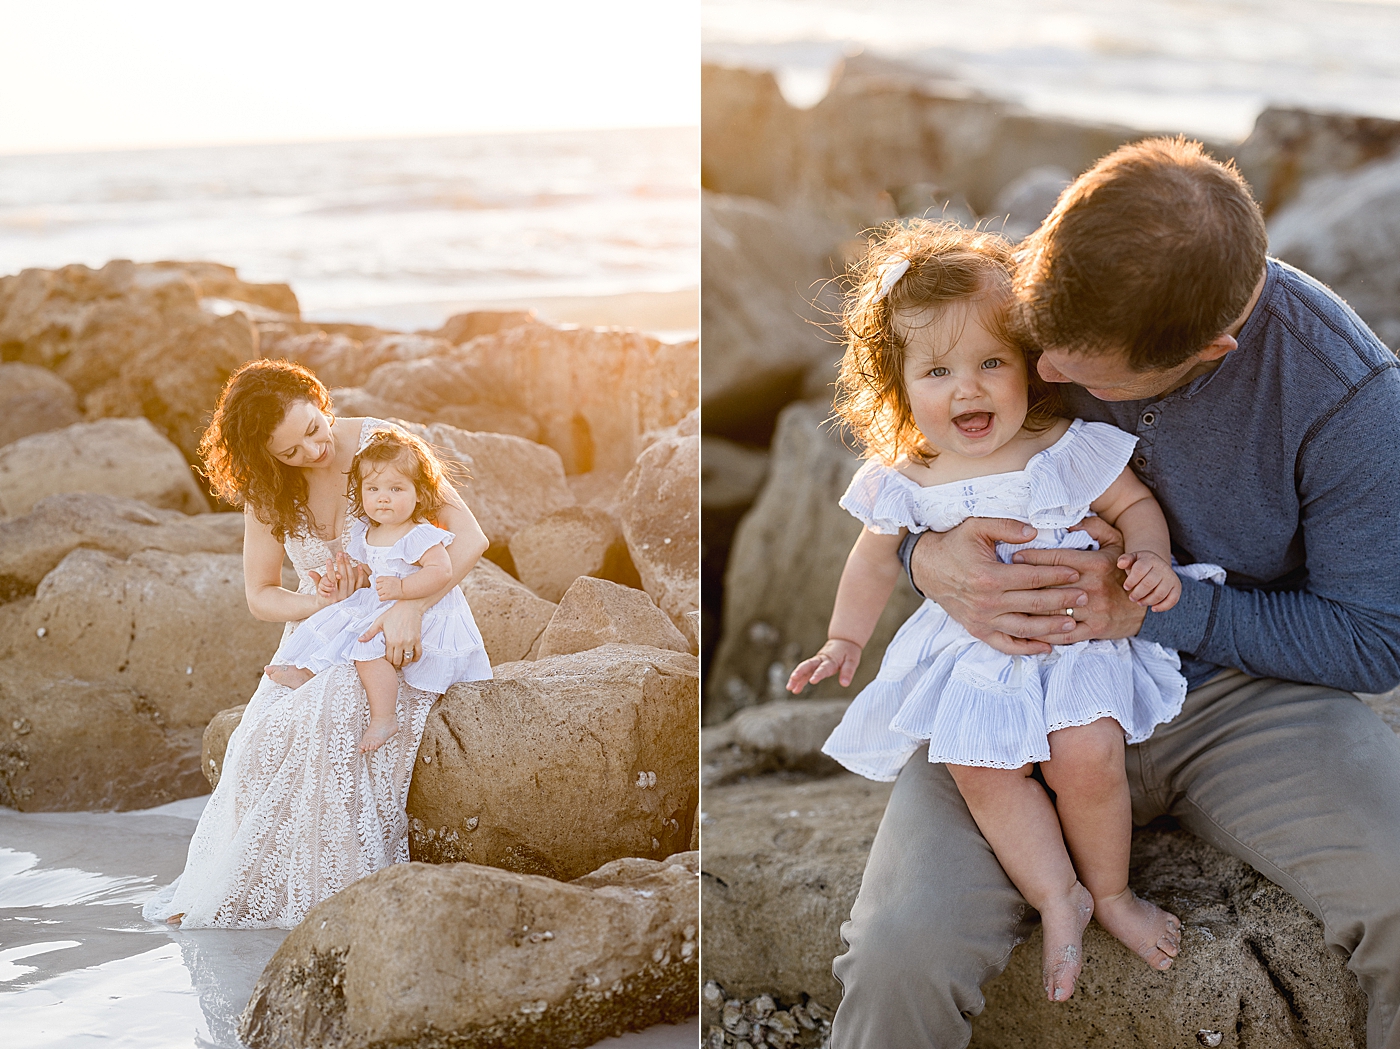 Sunset portraits on the beach for first birthday photoshoot. Photo by Brittany Elise Photography.